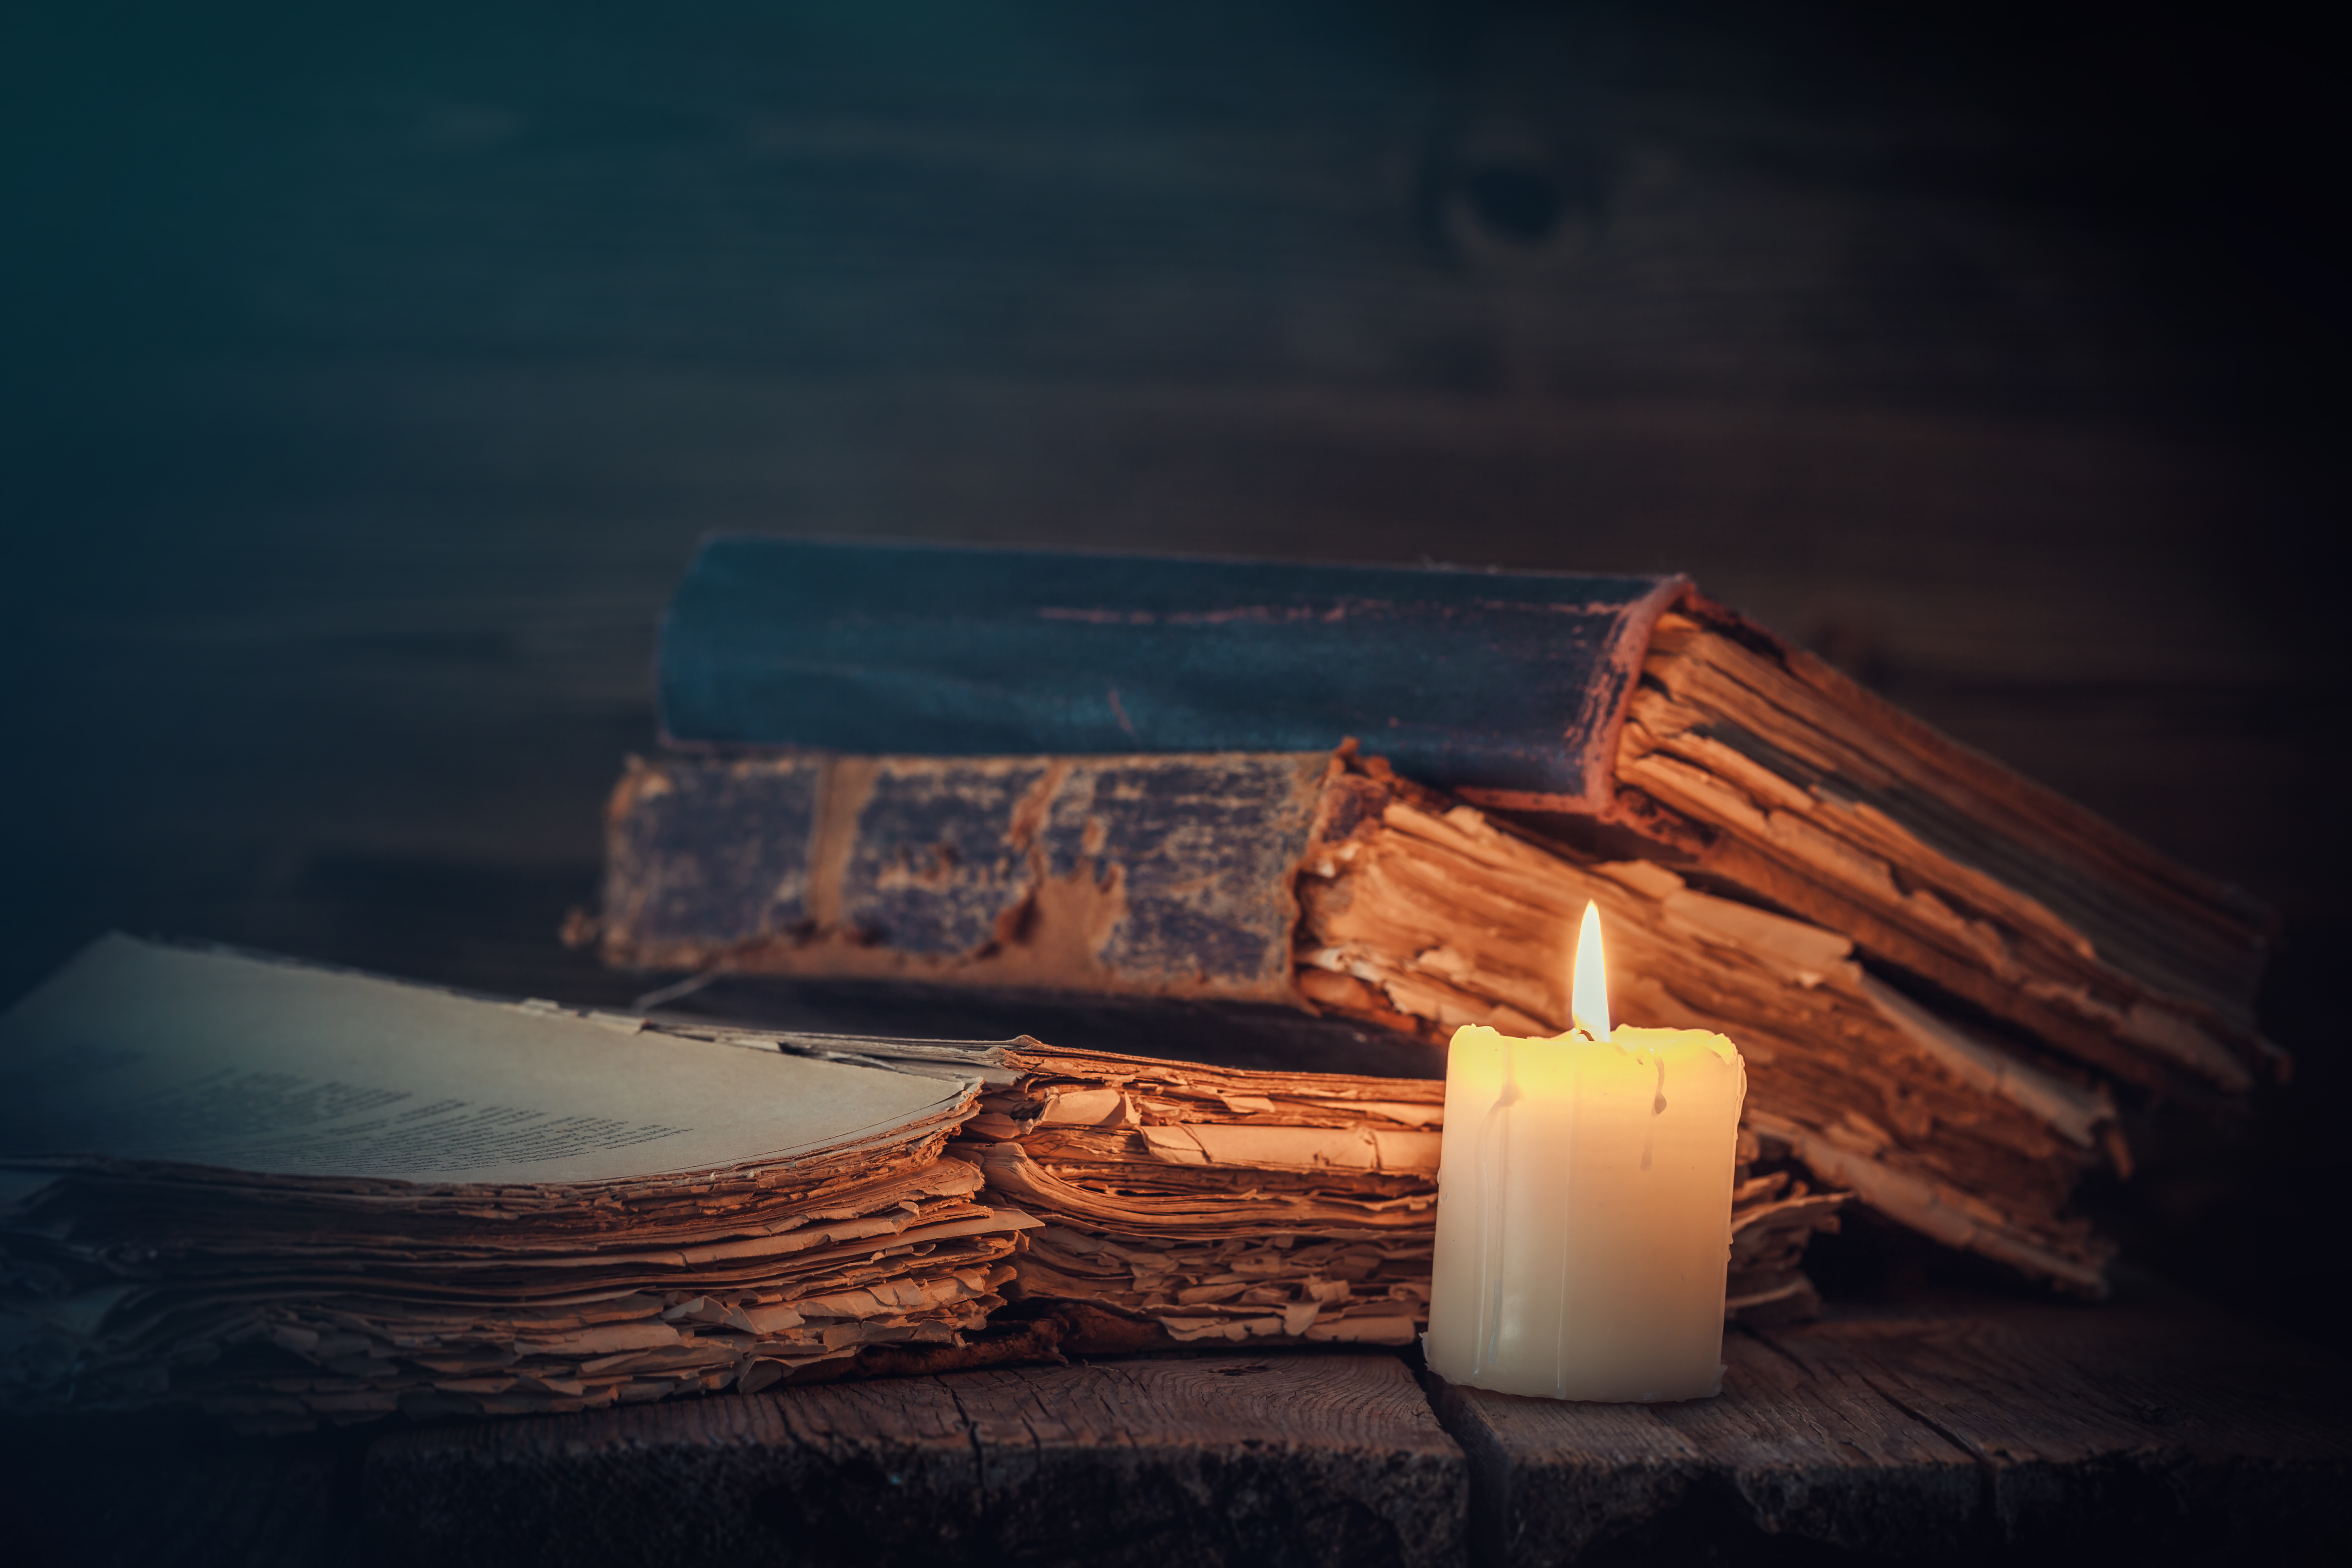 Witches practices, books and lit candle